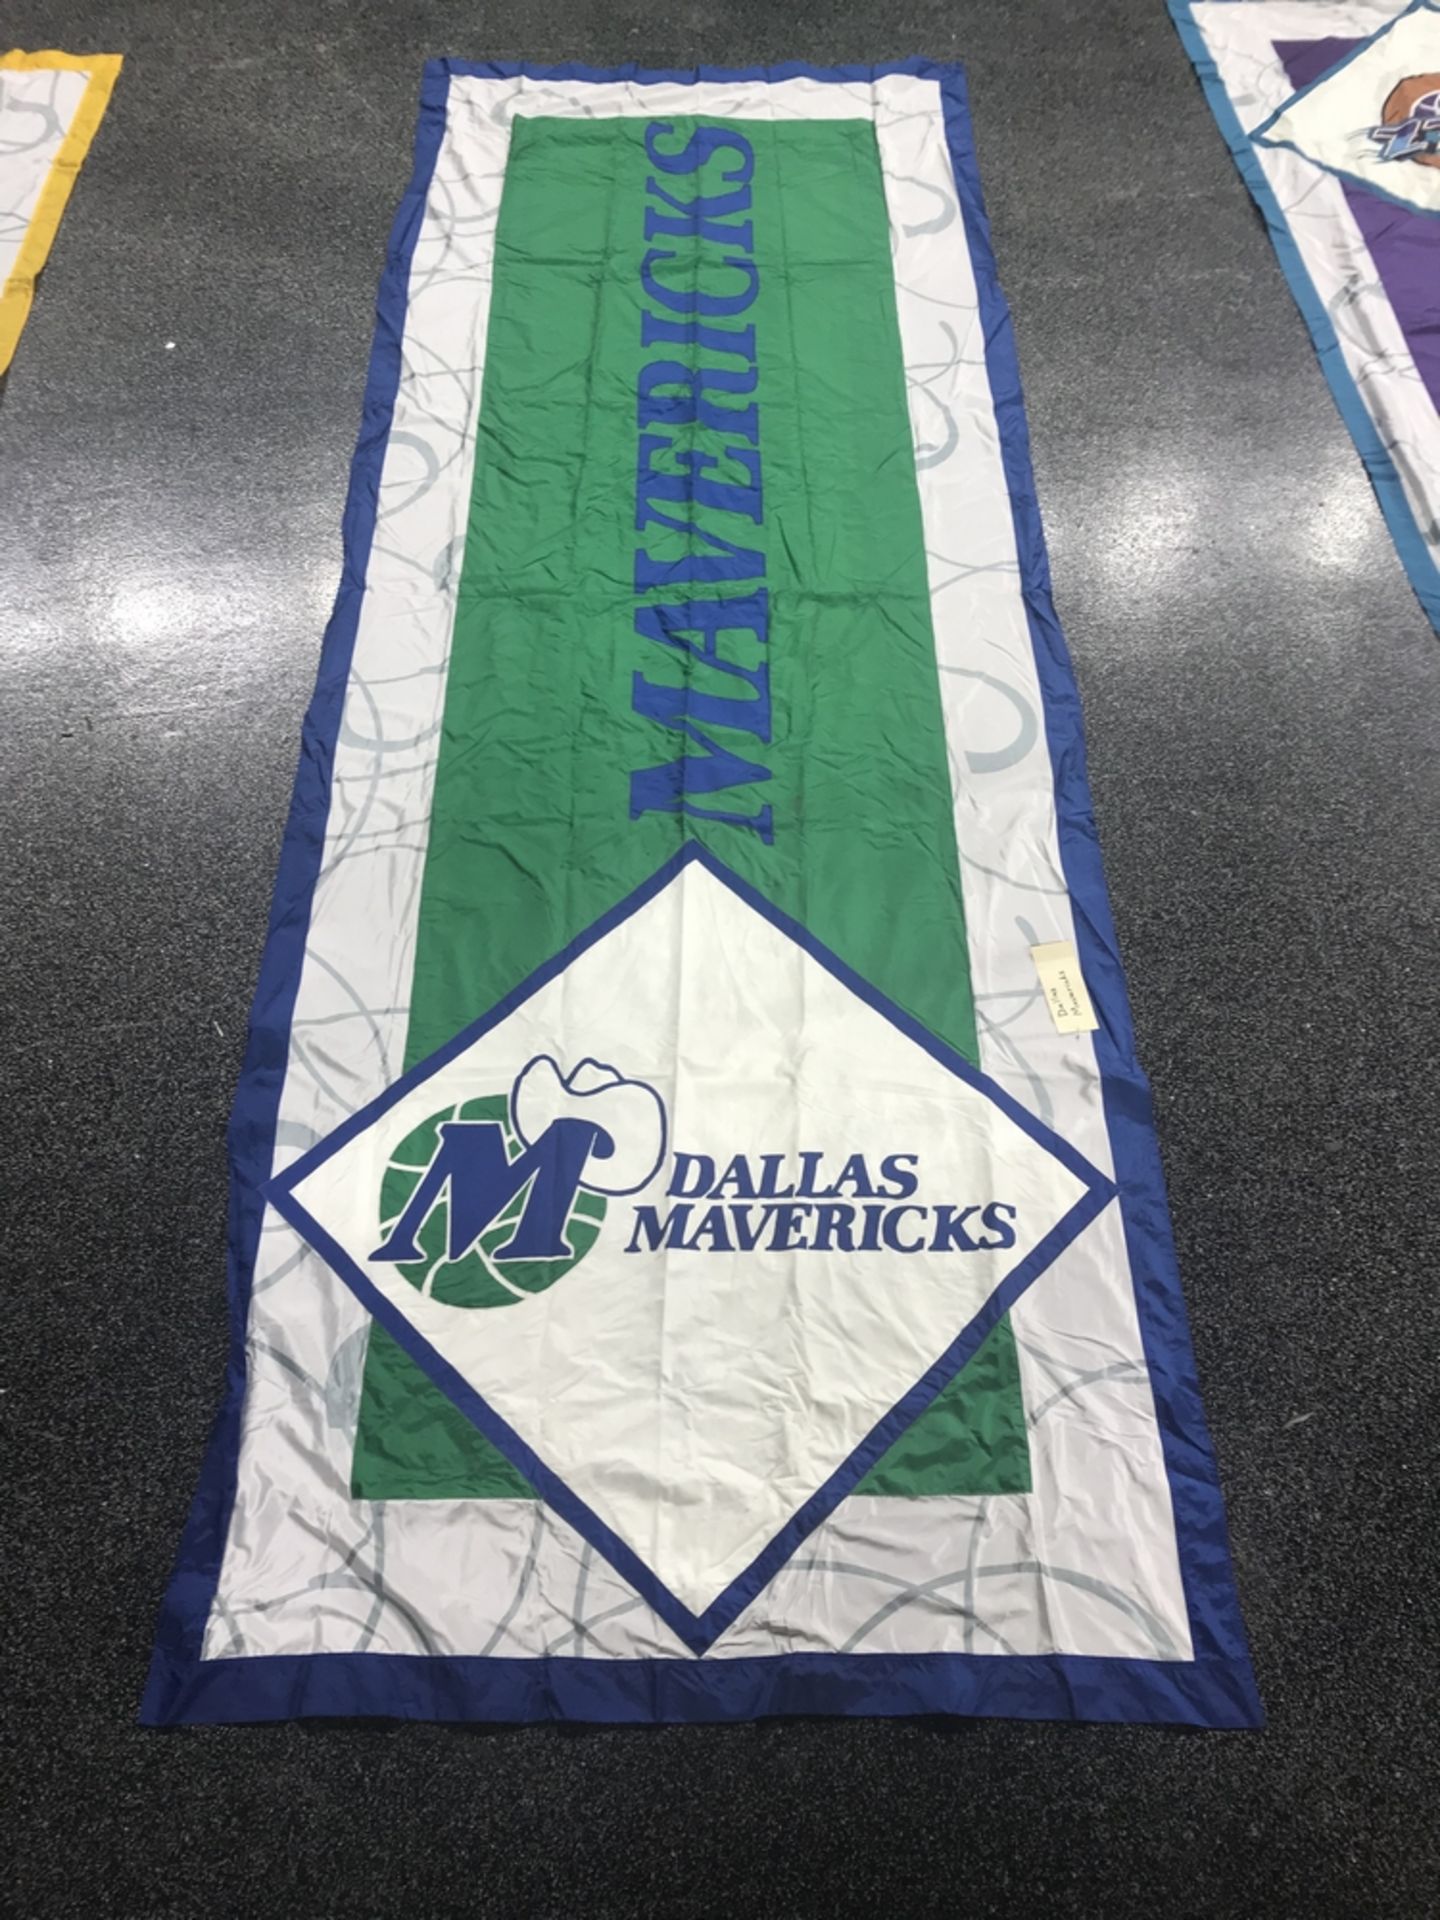 Double Sided Hand Sewn Banner "Dallas Mavericks" , Dim. 16 ft 4 in x 5 ft 10 in , Location: Suite